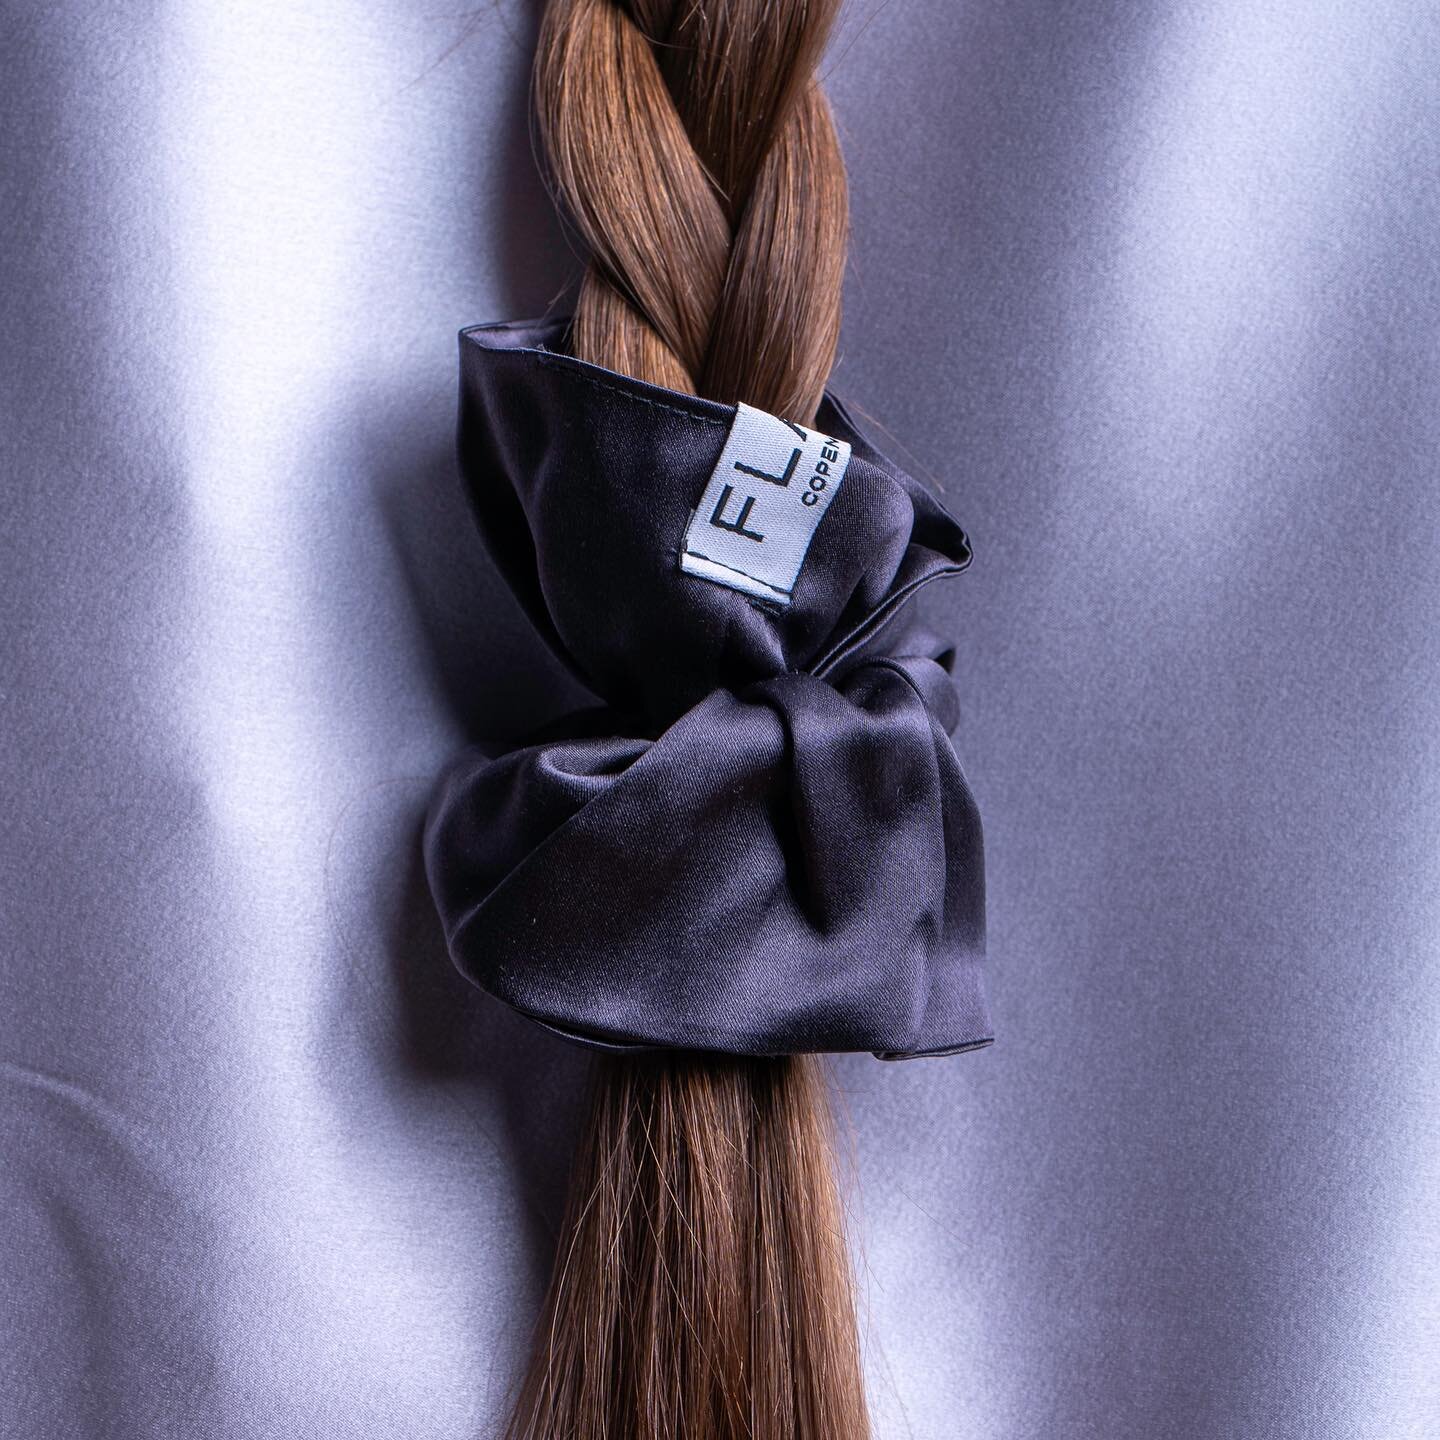 Our new limited edition silk scrunchies in granite and silver are now available online. Grab yours before they are gone!  Shop at flaircopenhagen.com